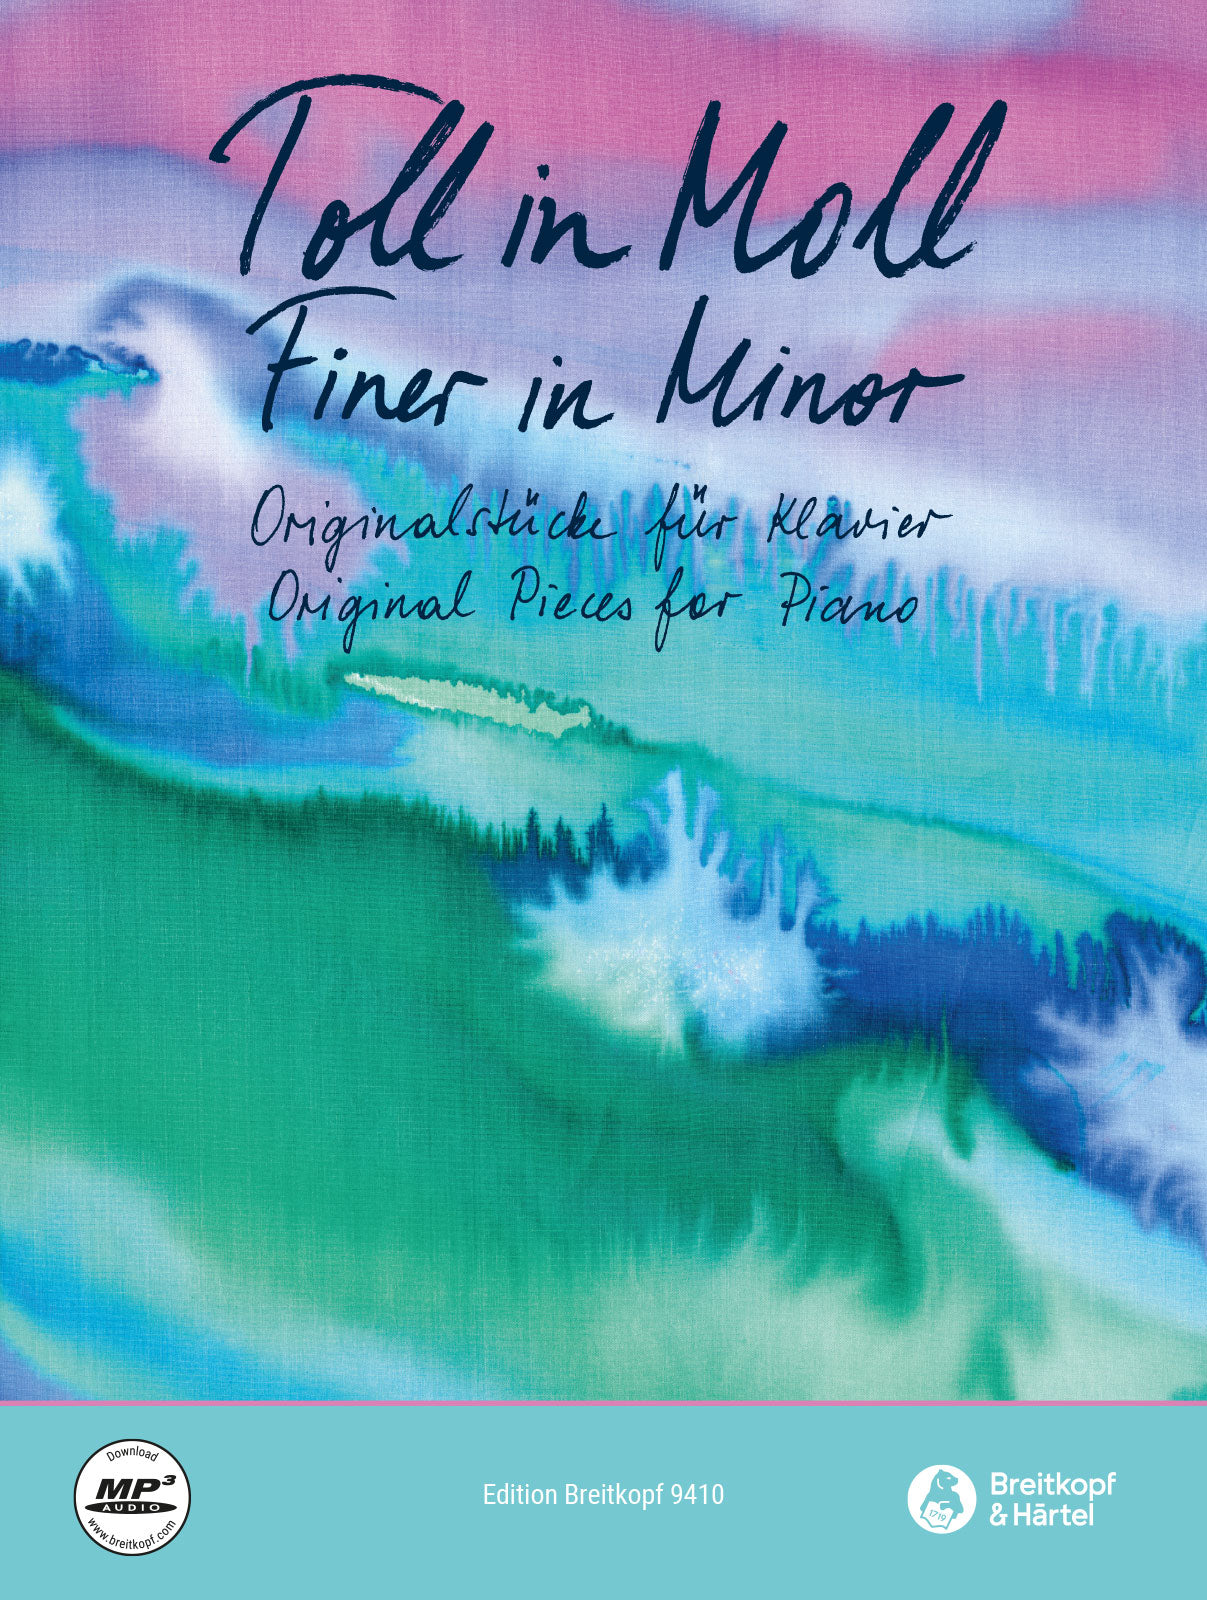 Finer in Minor (Toll in Moll) - Revised Edition